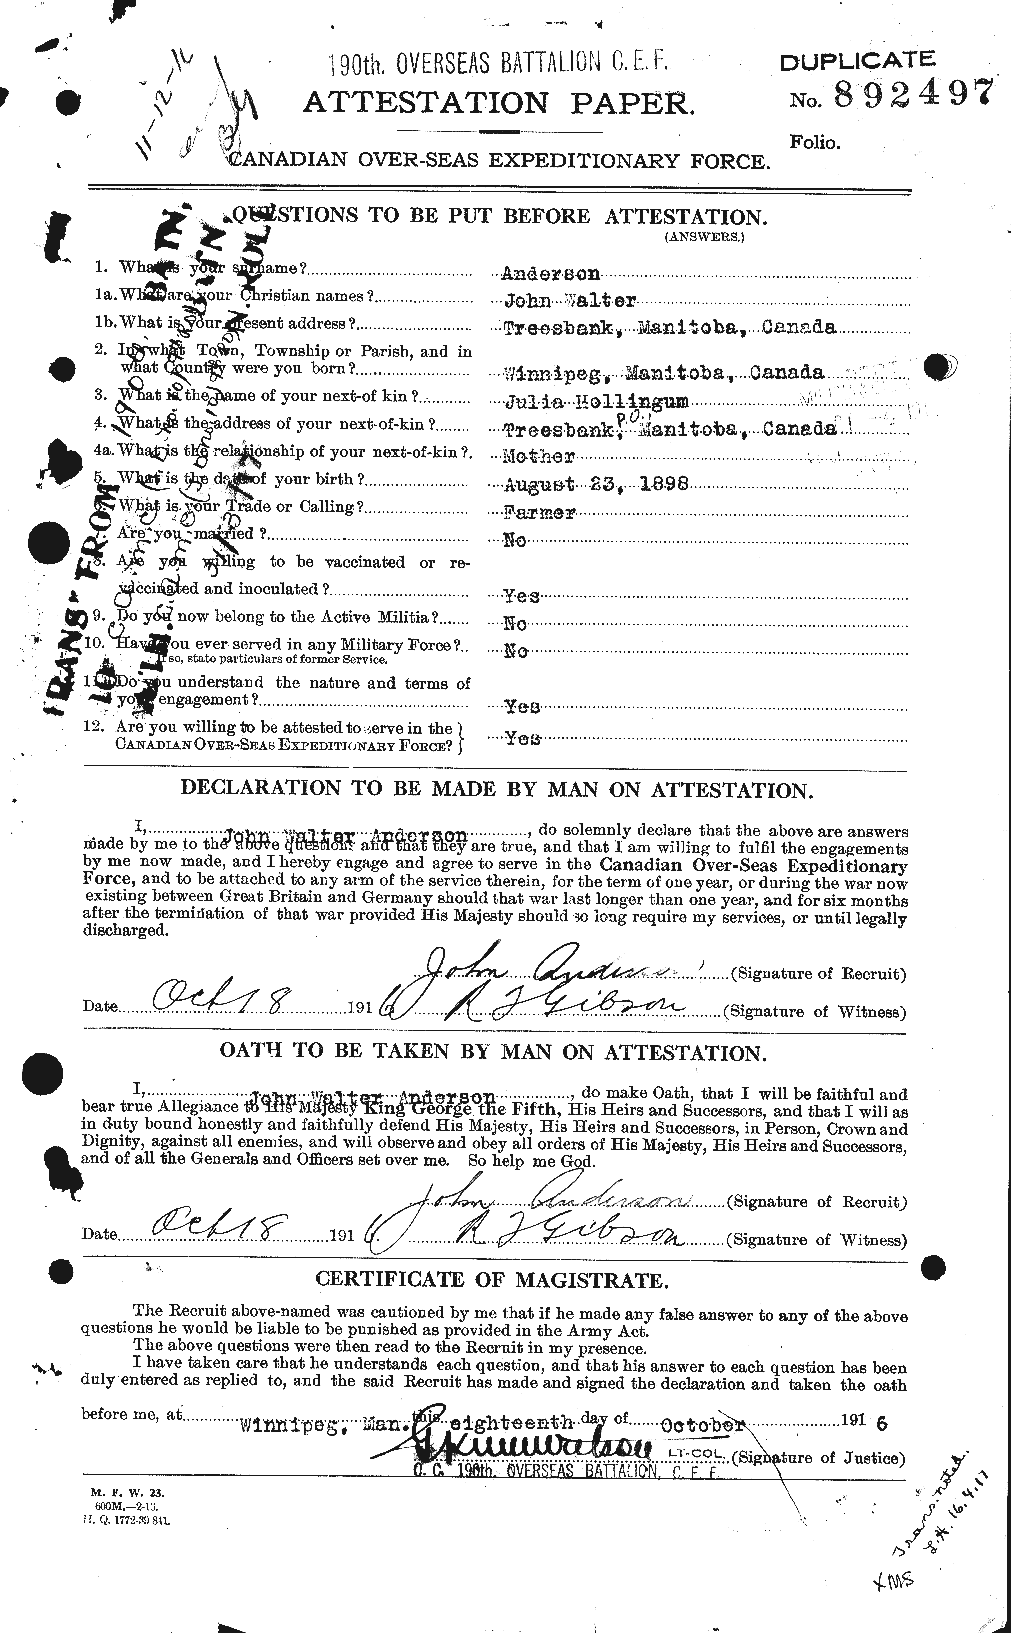 Personnel Records of the First World War - CEF 207599a